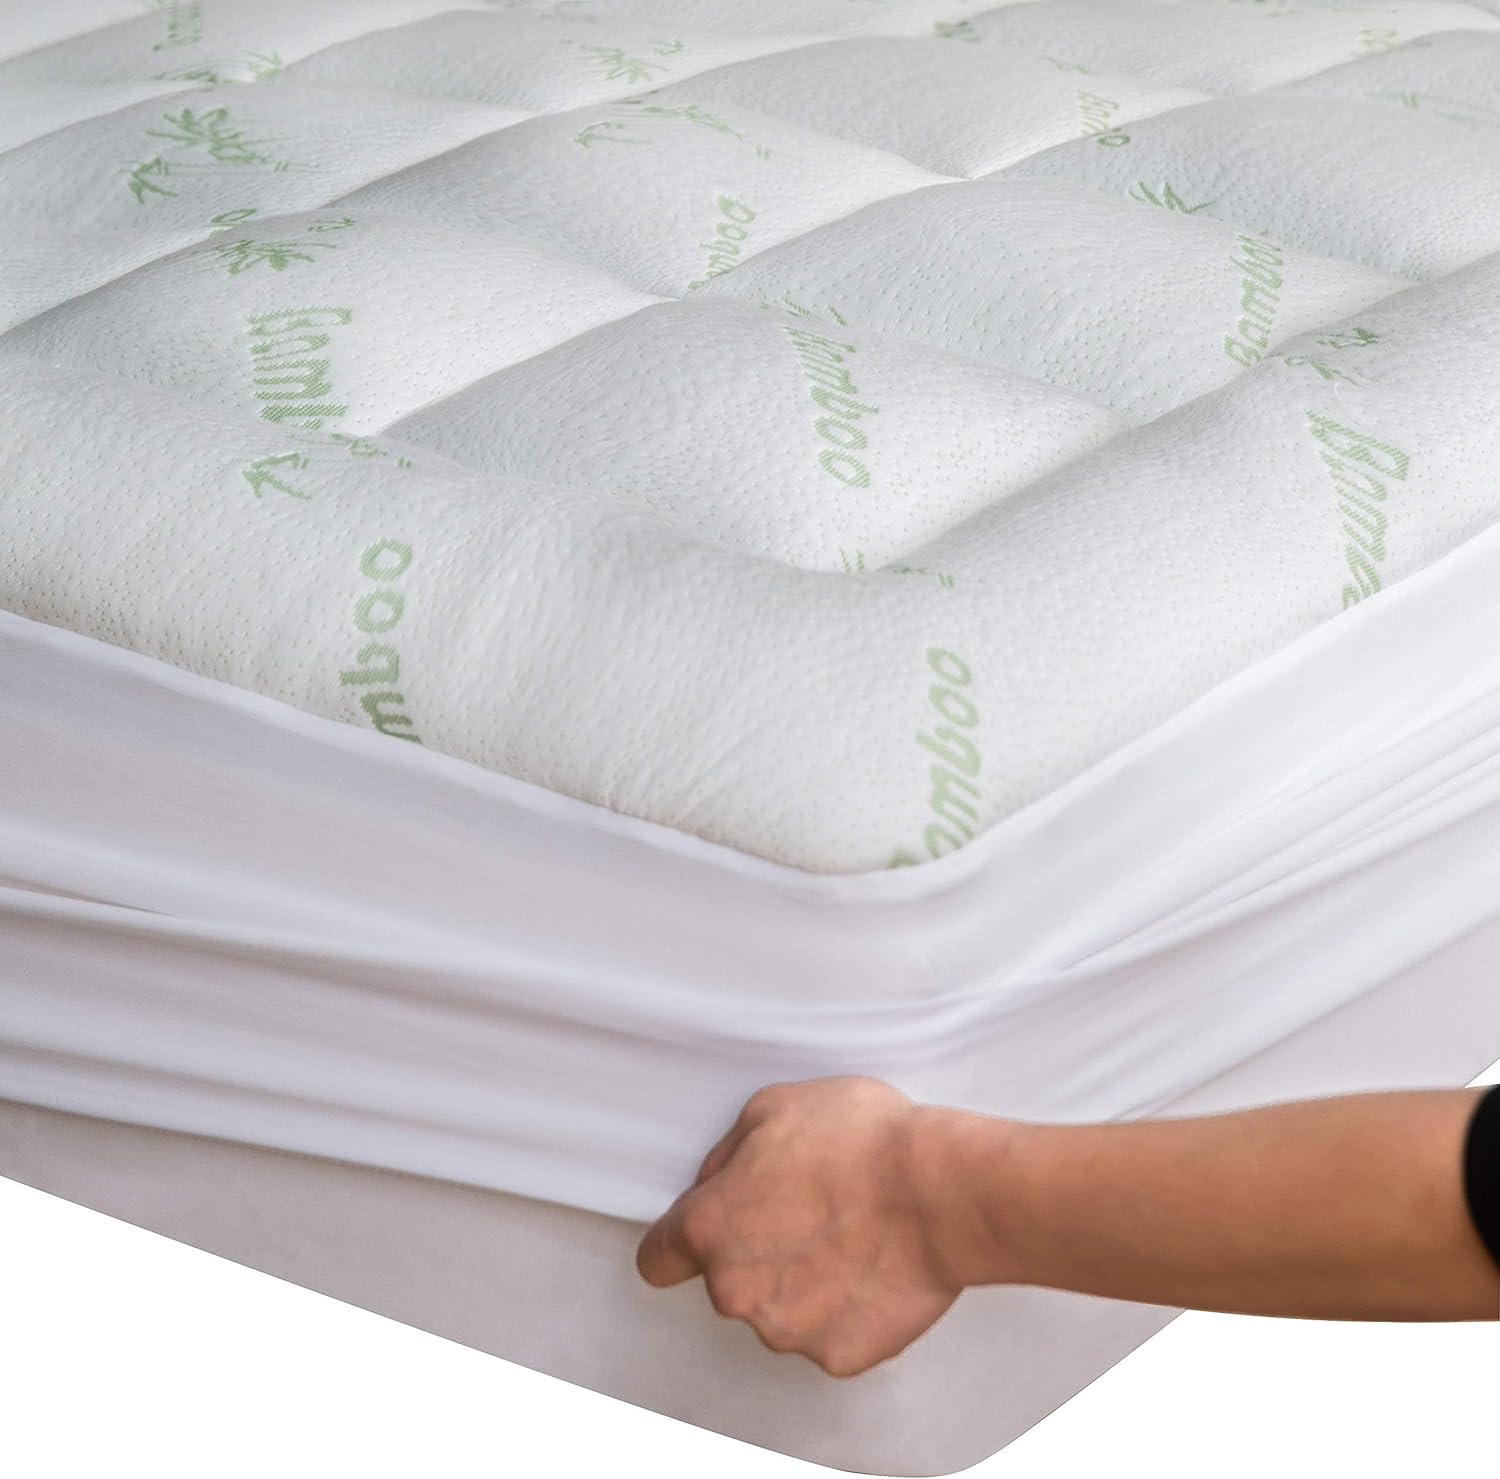 Bamboo King Mattress Topper - Thick Cooling Breathable Pillow Top Mattress Pad for Back Pain Relief - Deep Pocket Topper Fits 8-20 Inches Mattress (Viscose Made from Bamboo, 78x80 Inches)